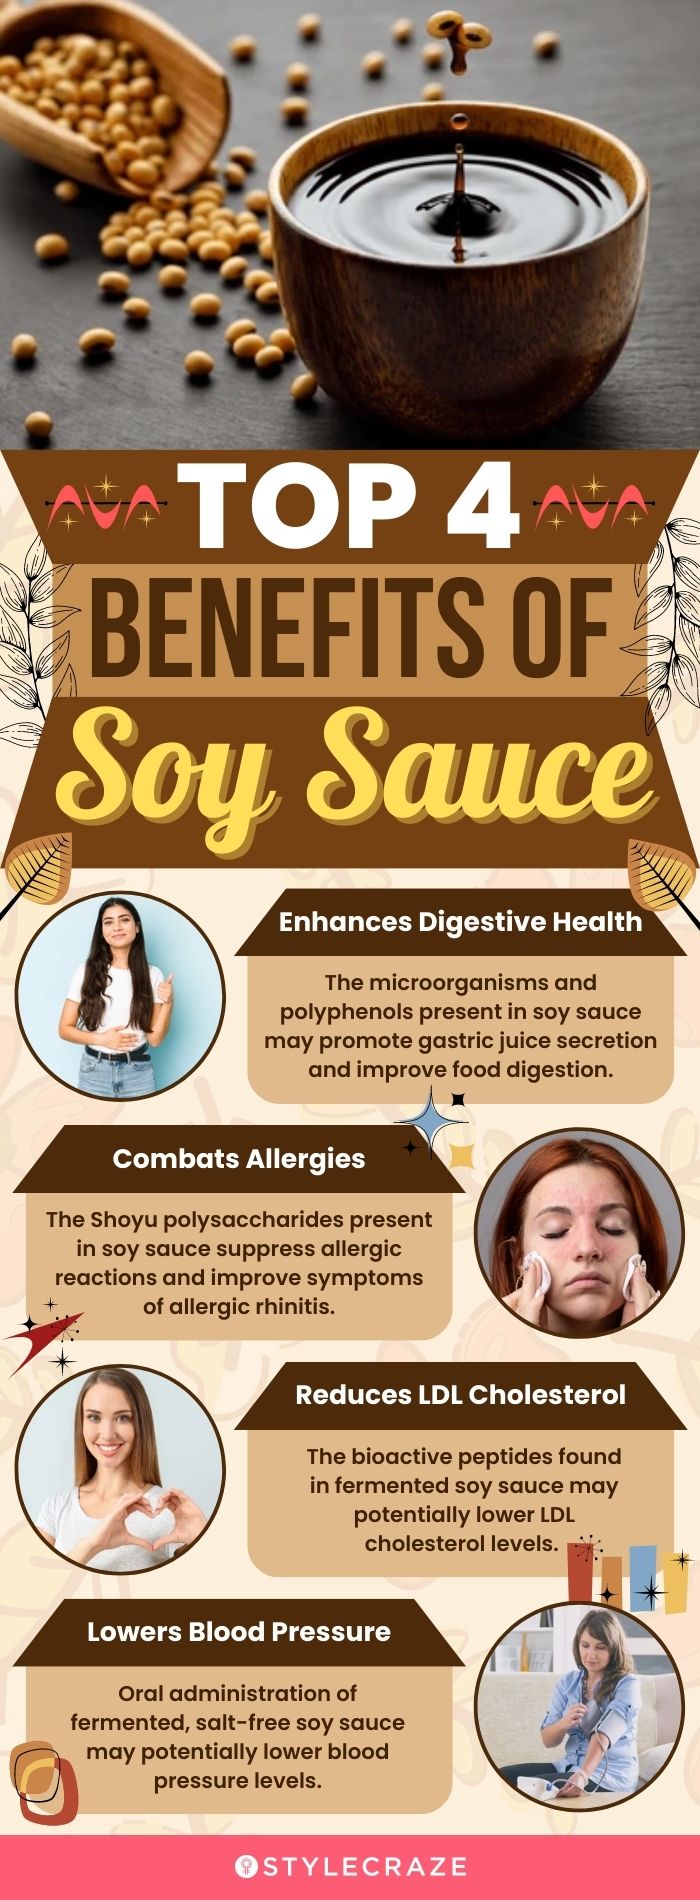 5 Health Benefits of Soy